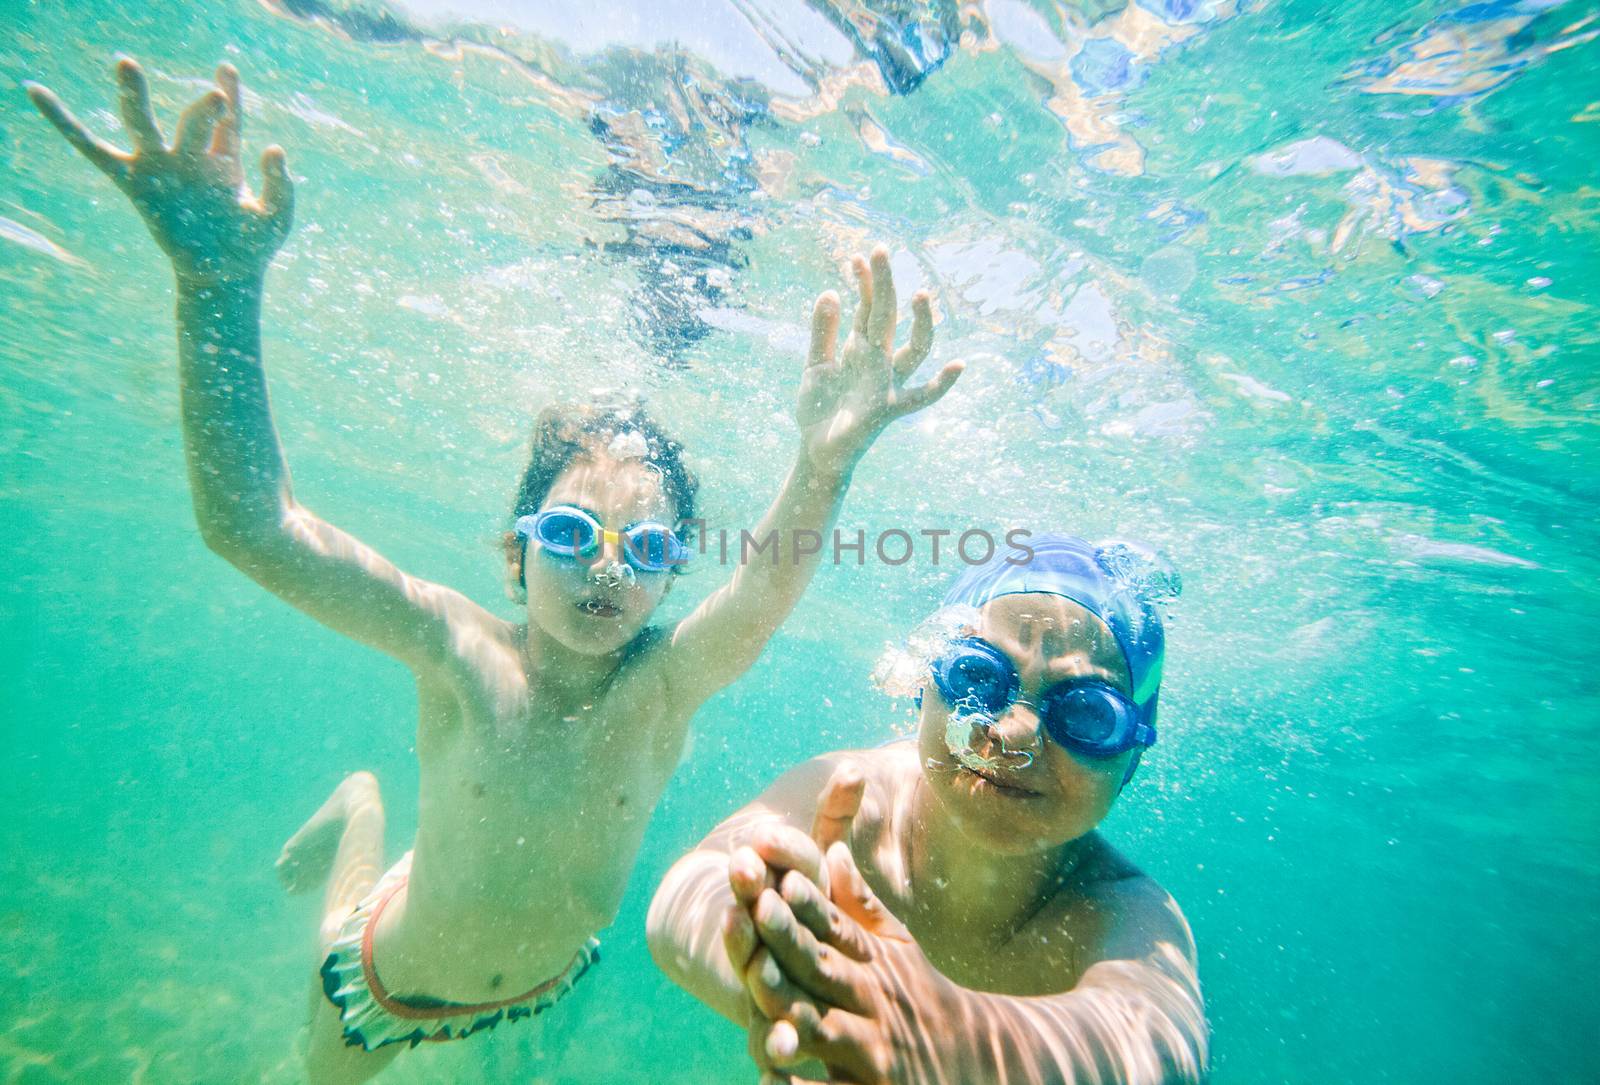 Two kids - boy and a girl, about seven years old are swimming underwater in a sea or ocean.